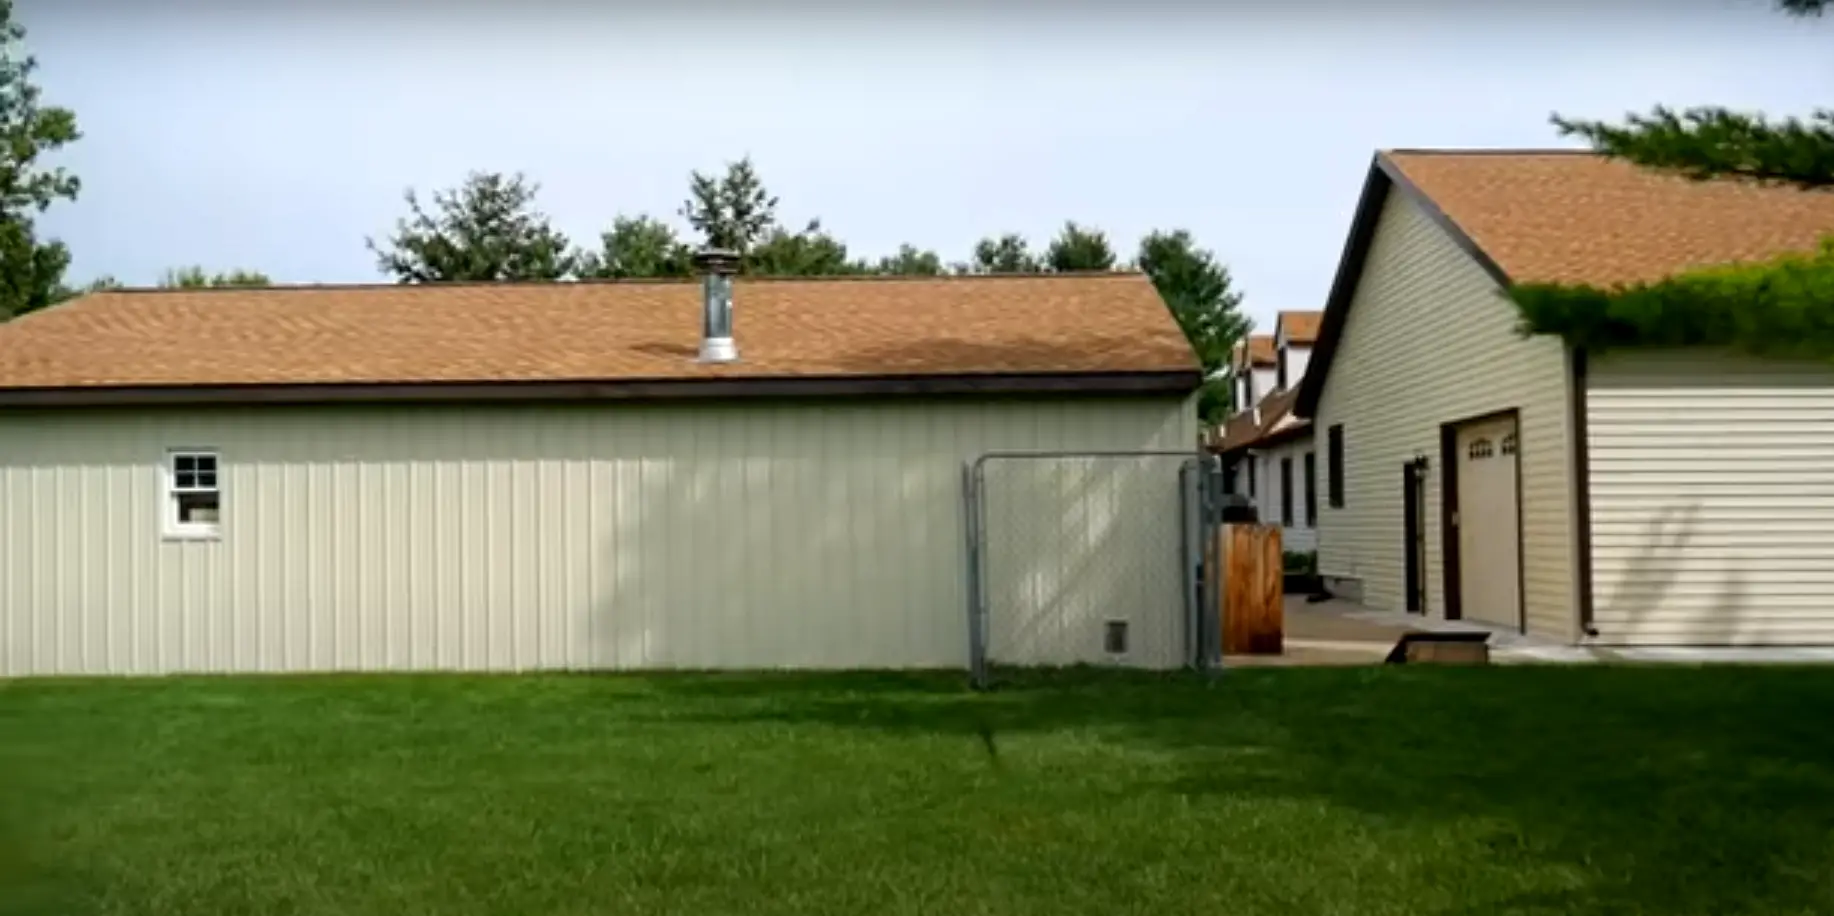 Can You Paint A Shed With A Roller?